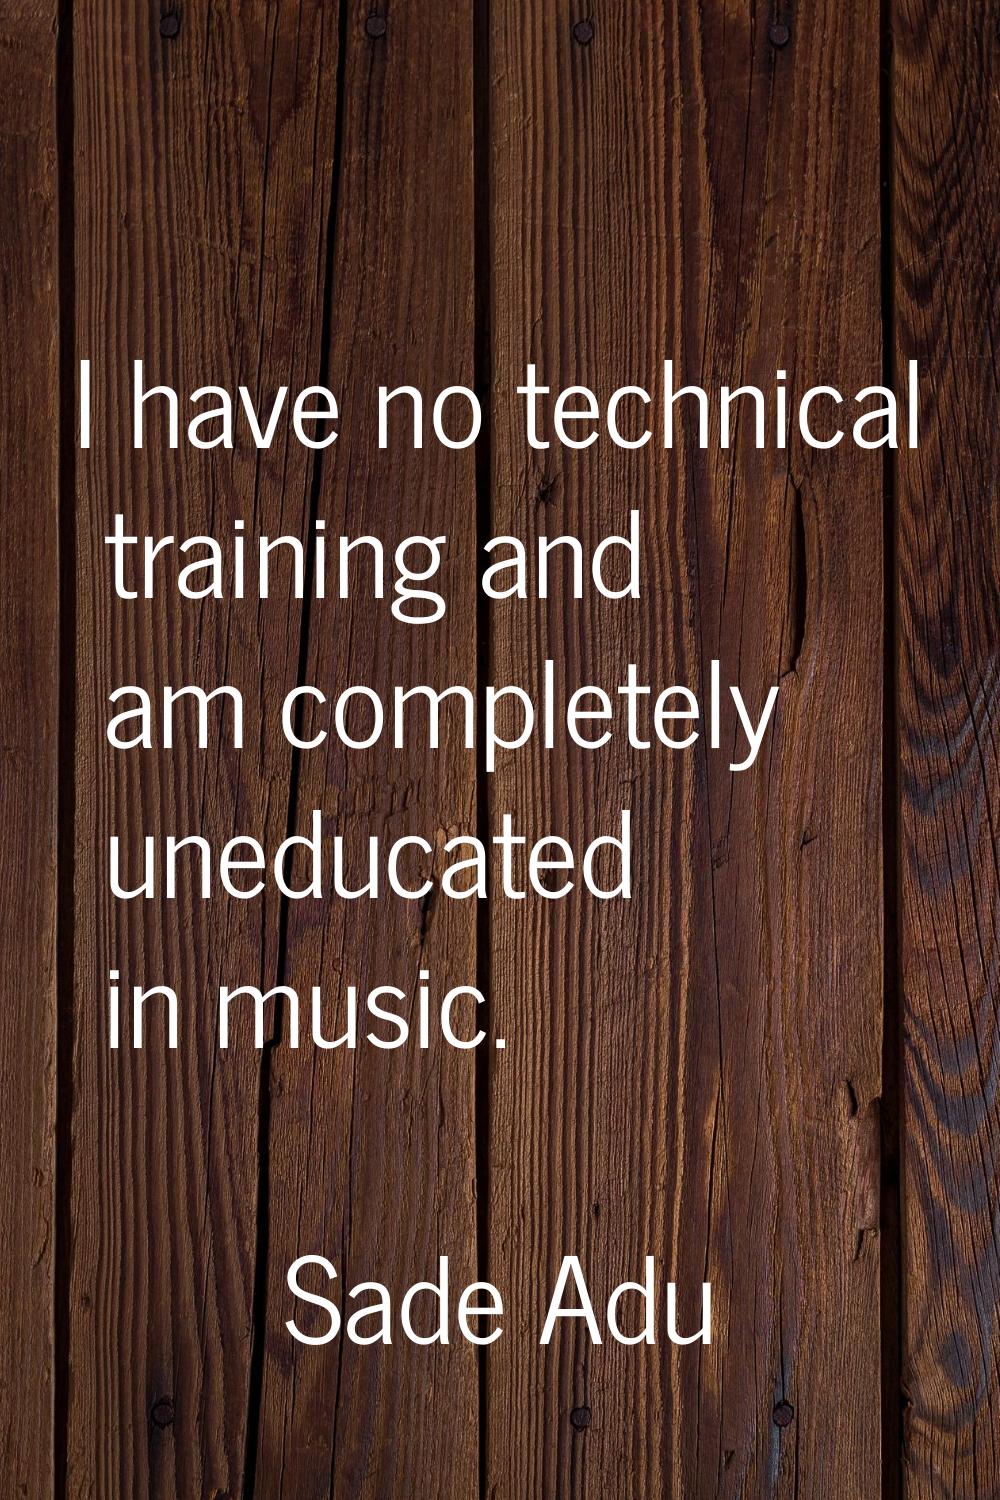 I have no technical training and am completely uneducated in music.